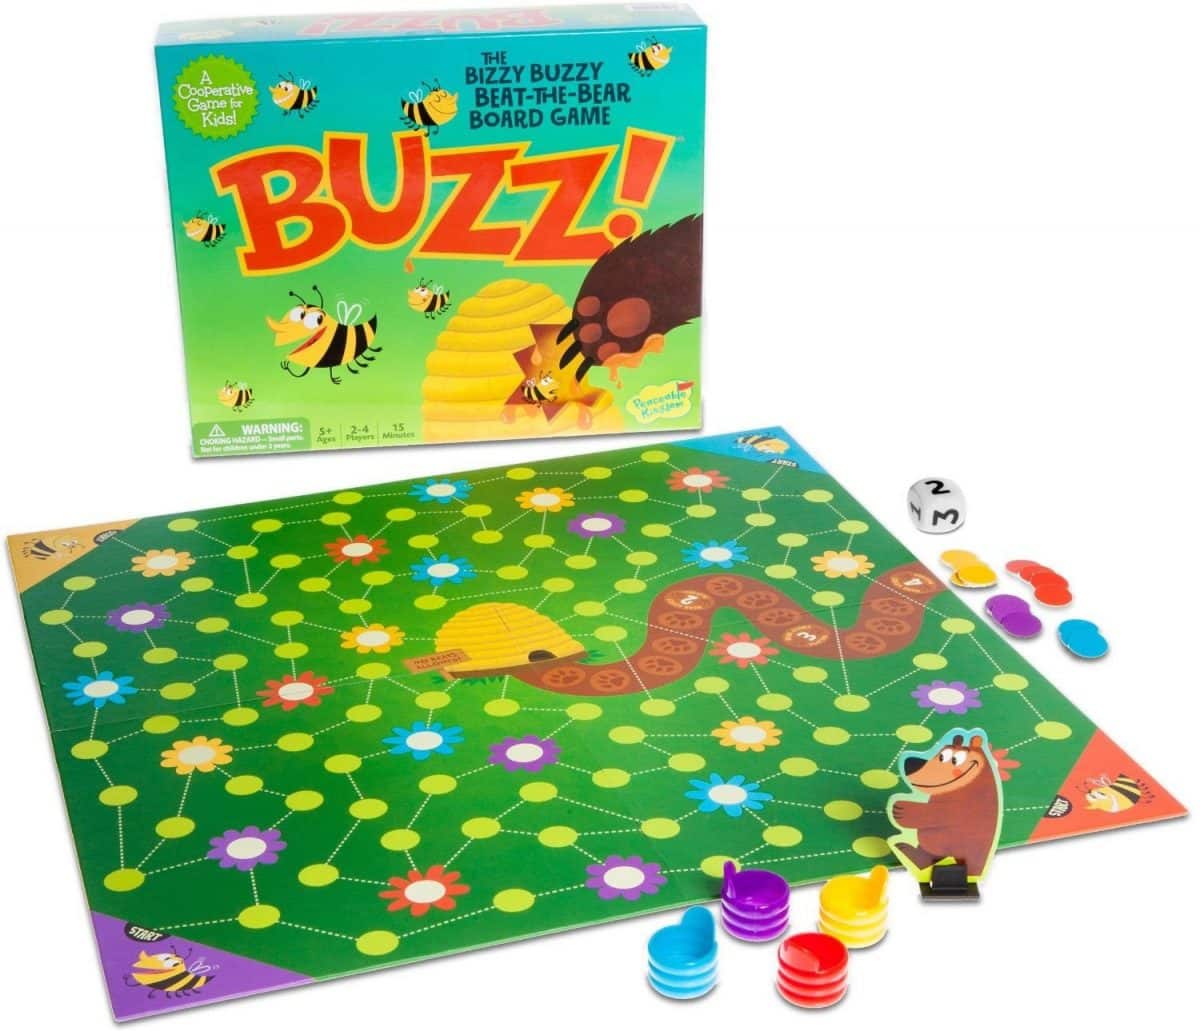 X Board Games You Need For Your Next Family Game Night